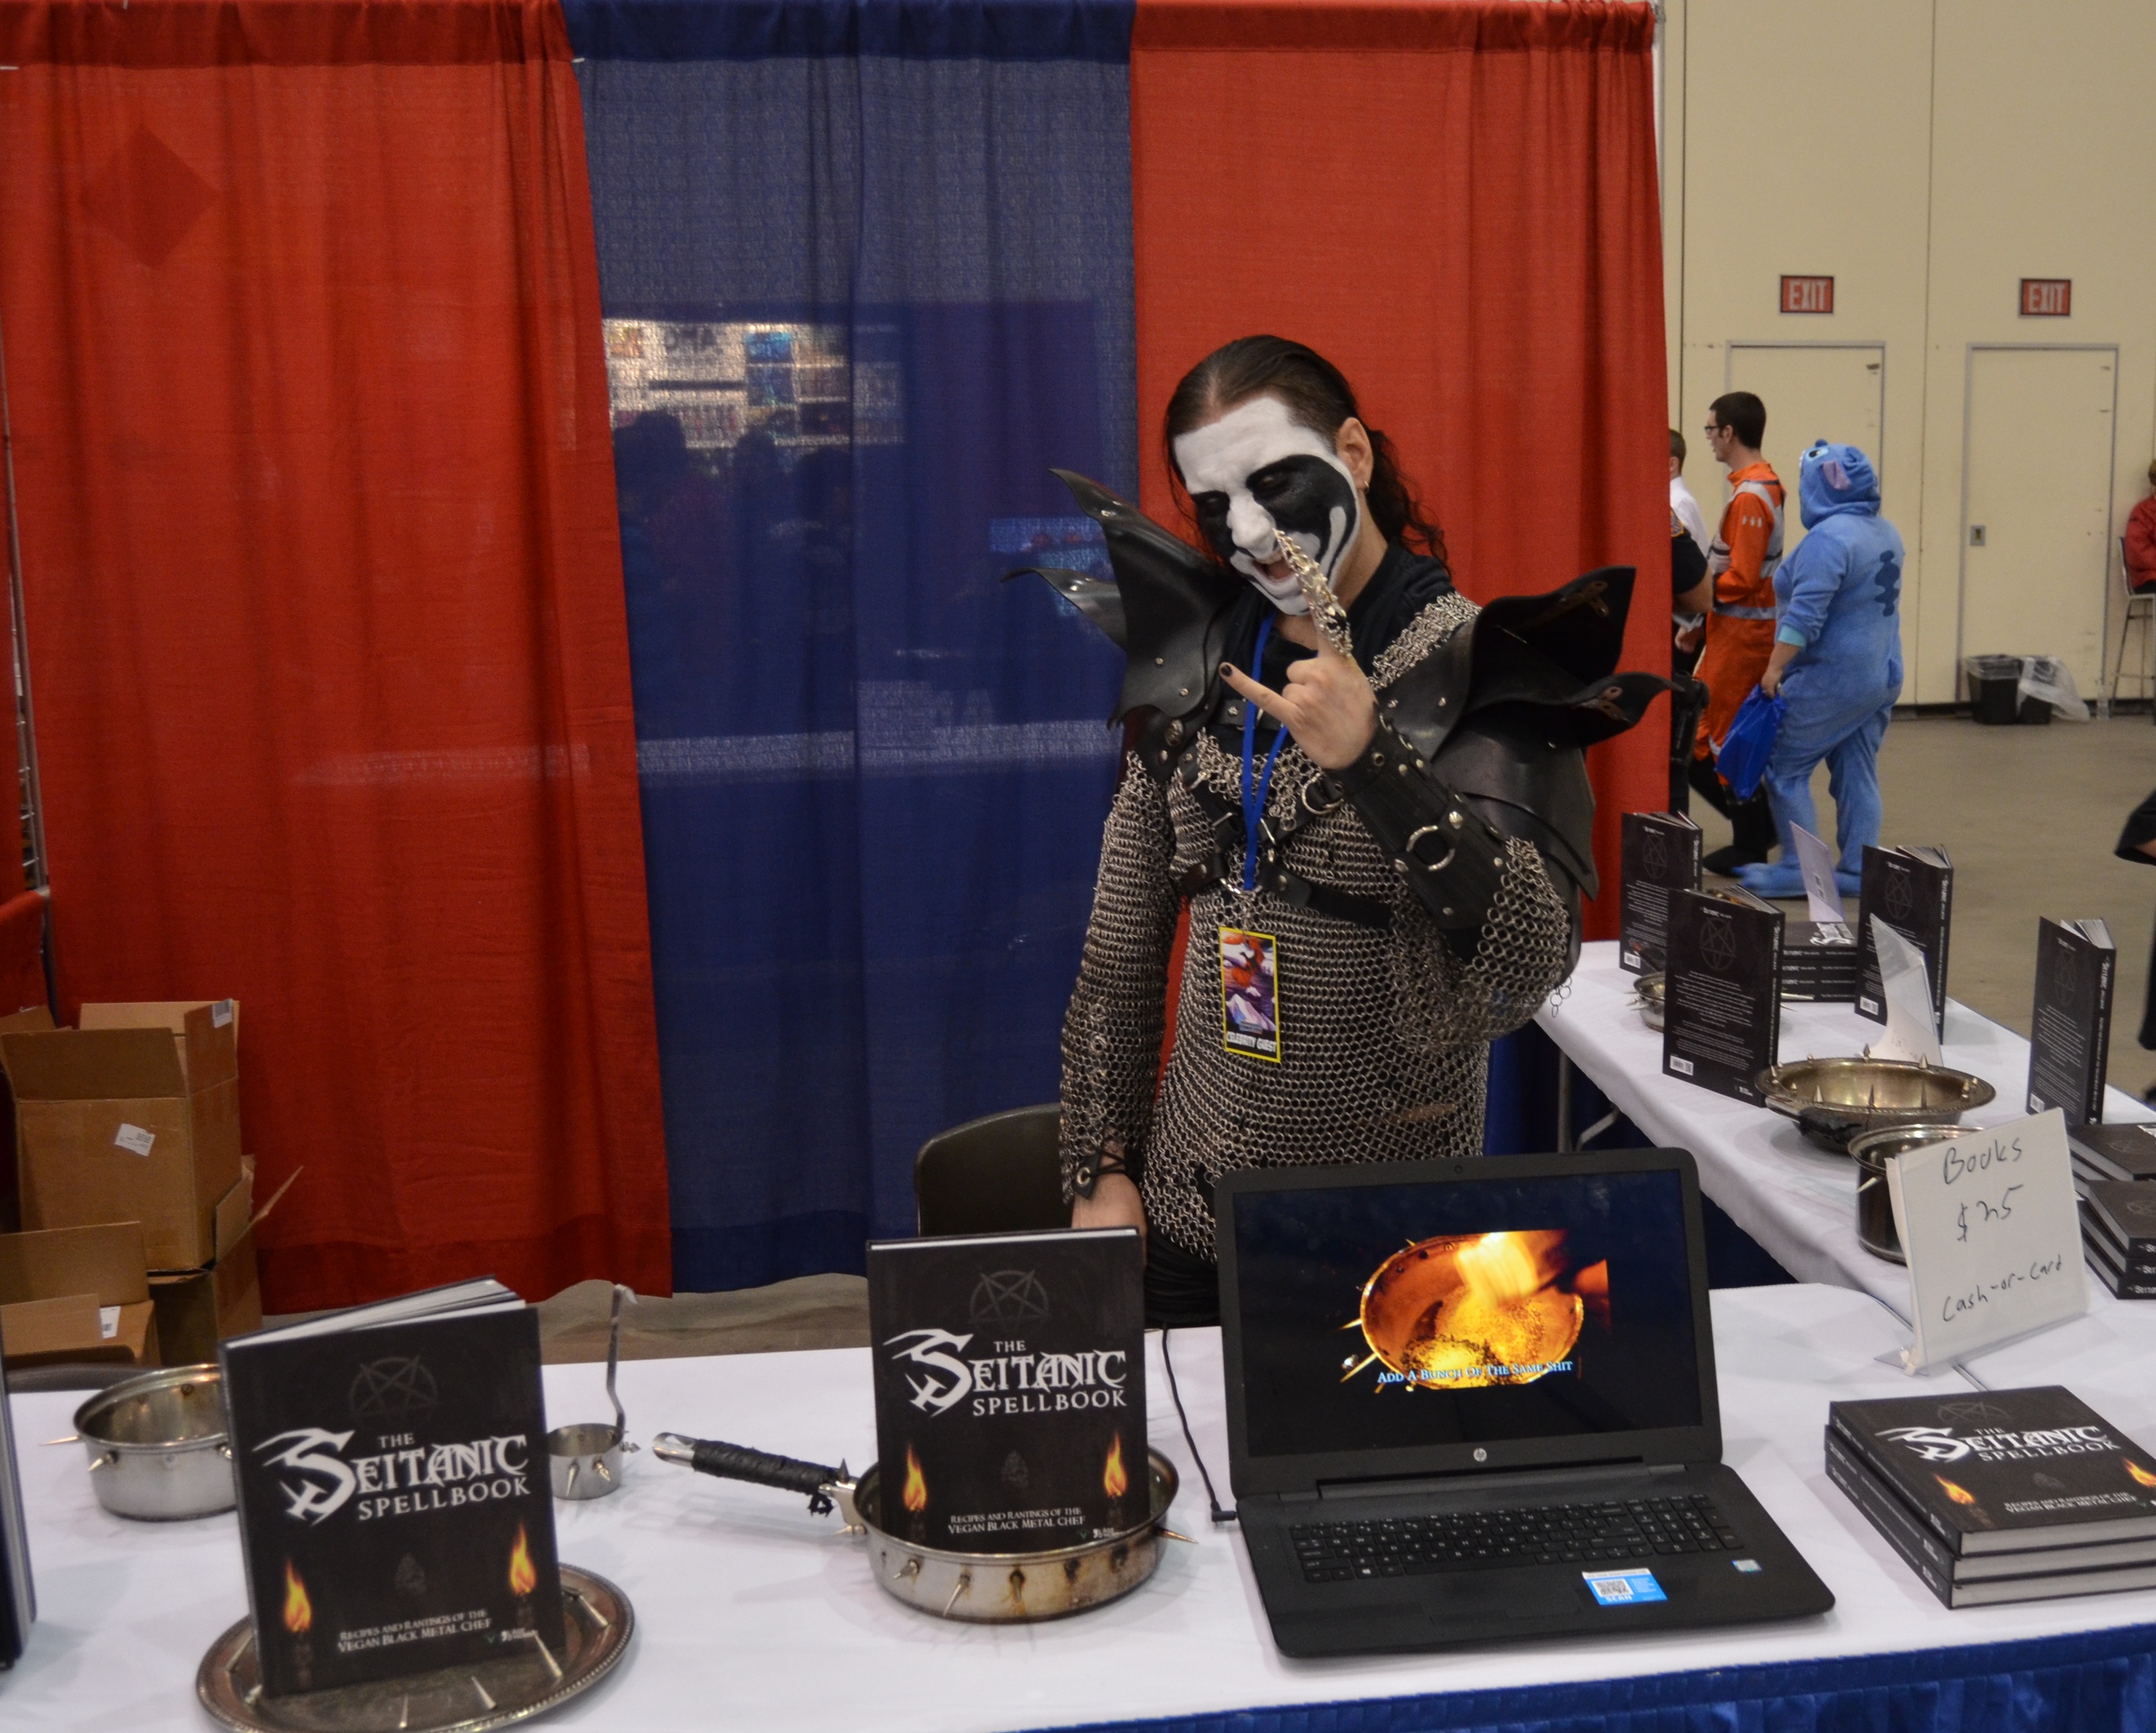 Grand Rapids Comic Con even got YouTube celebrity Vegan Black Metal Chef this year, who had a booth, and also did a live cooking demonstration